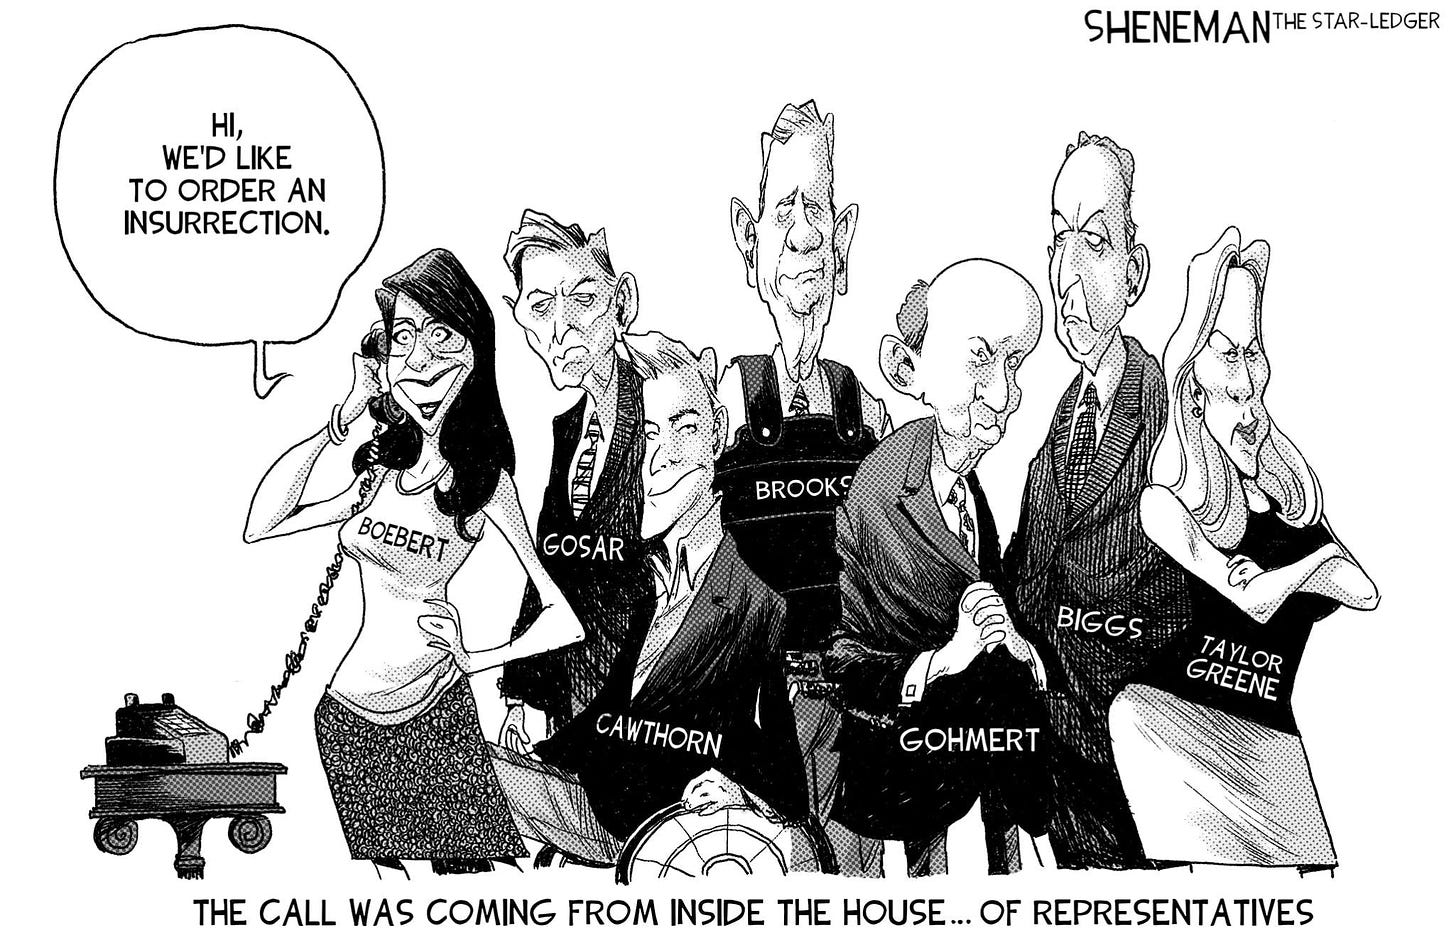 May be a cartoon of 2 people and text that says 'HI, WE'D LIKE TO ORDER AN INSURRECTION. SHENEMANTHE STAR-LEDGER BOEBERT BROOK GOSAR CAWTHORN BIGGS ig0 GREENE TAYLOR GOHMERT THE CALL WAS COMING FROM INSIDE THE HOUSE... OF REPRESENTATIVES'